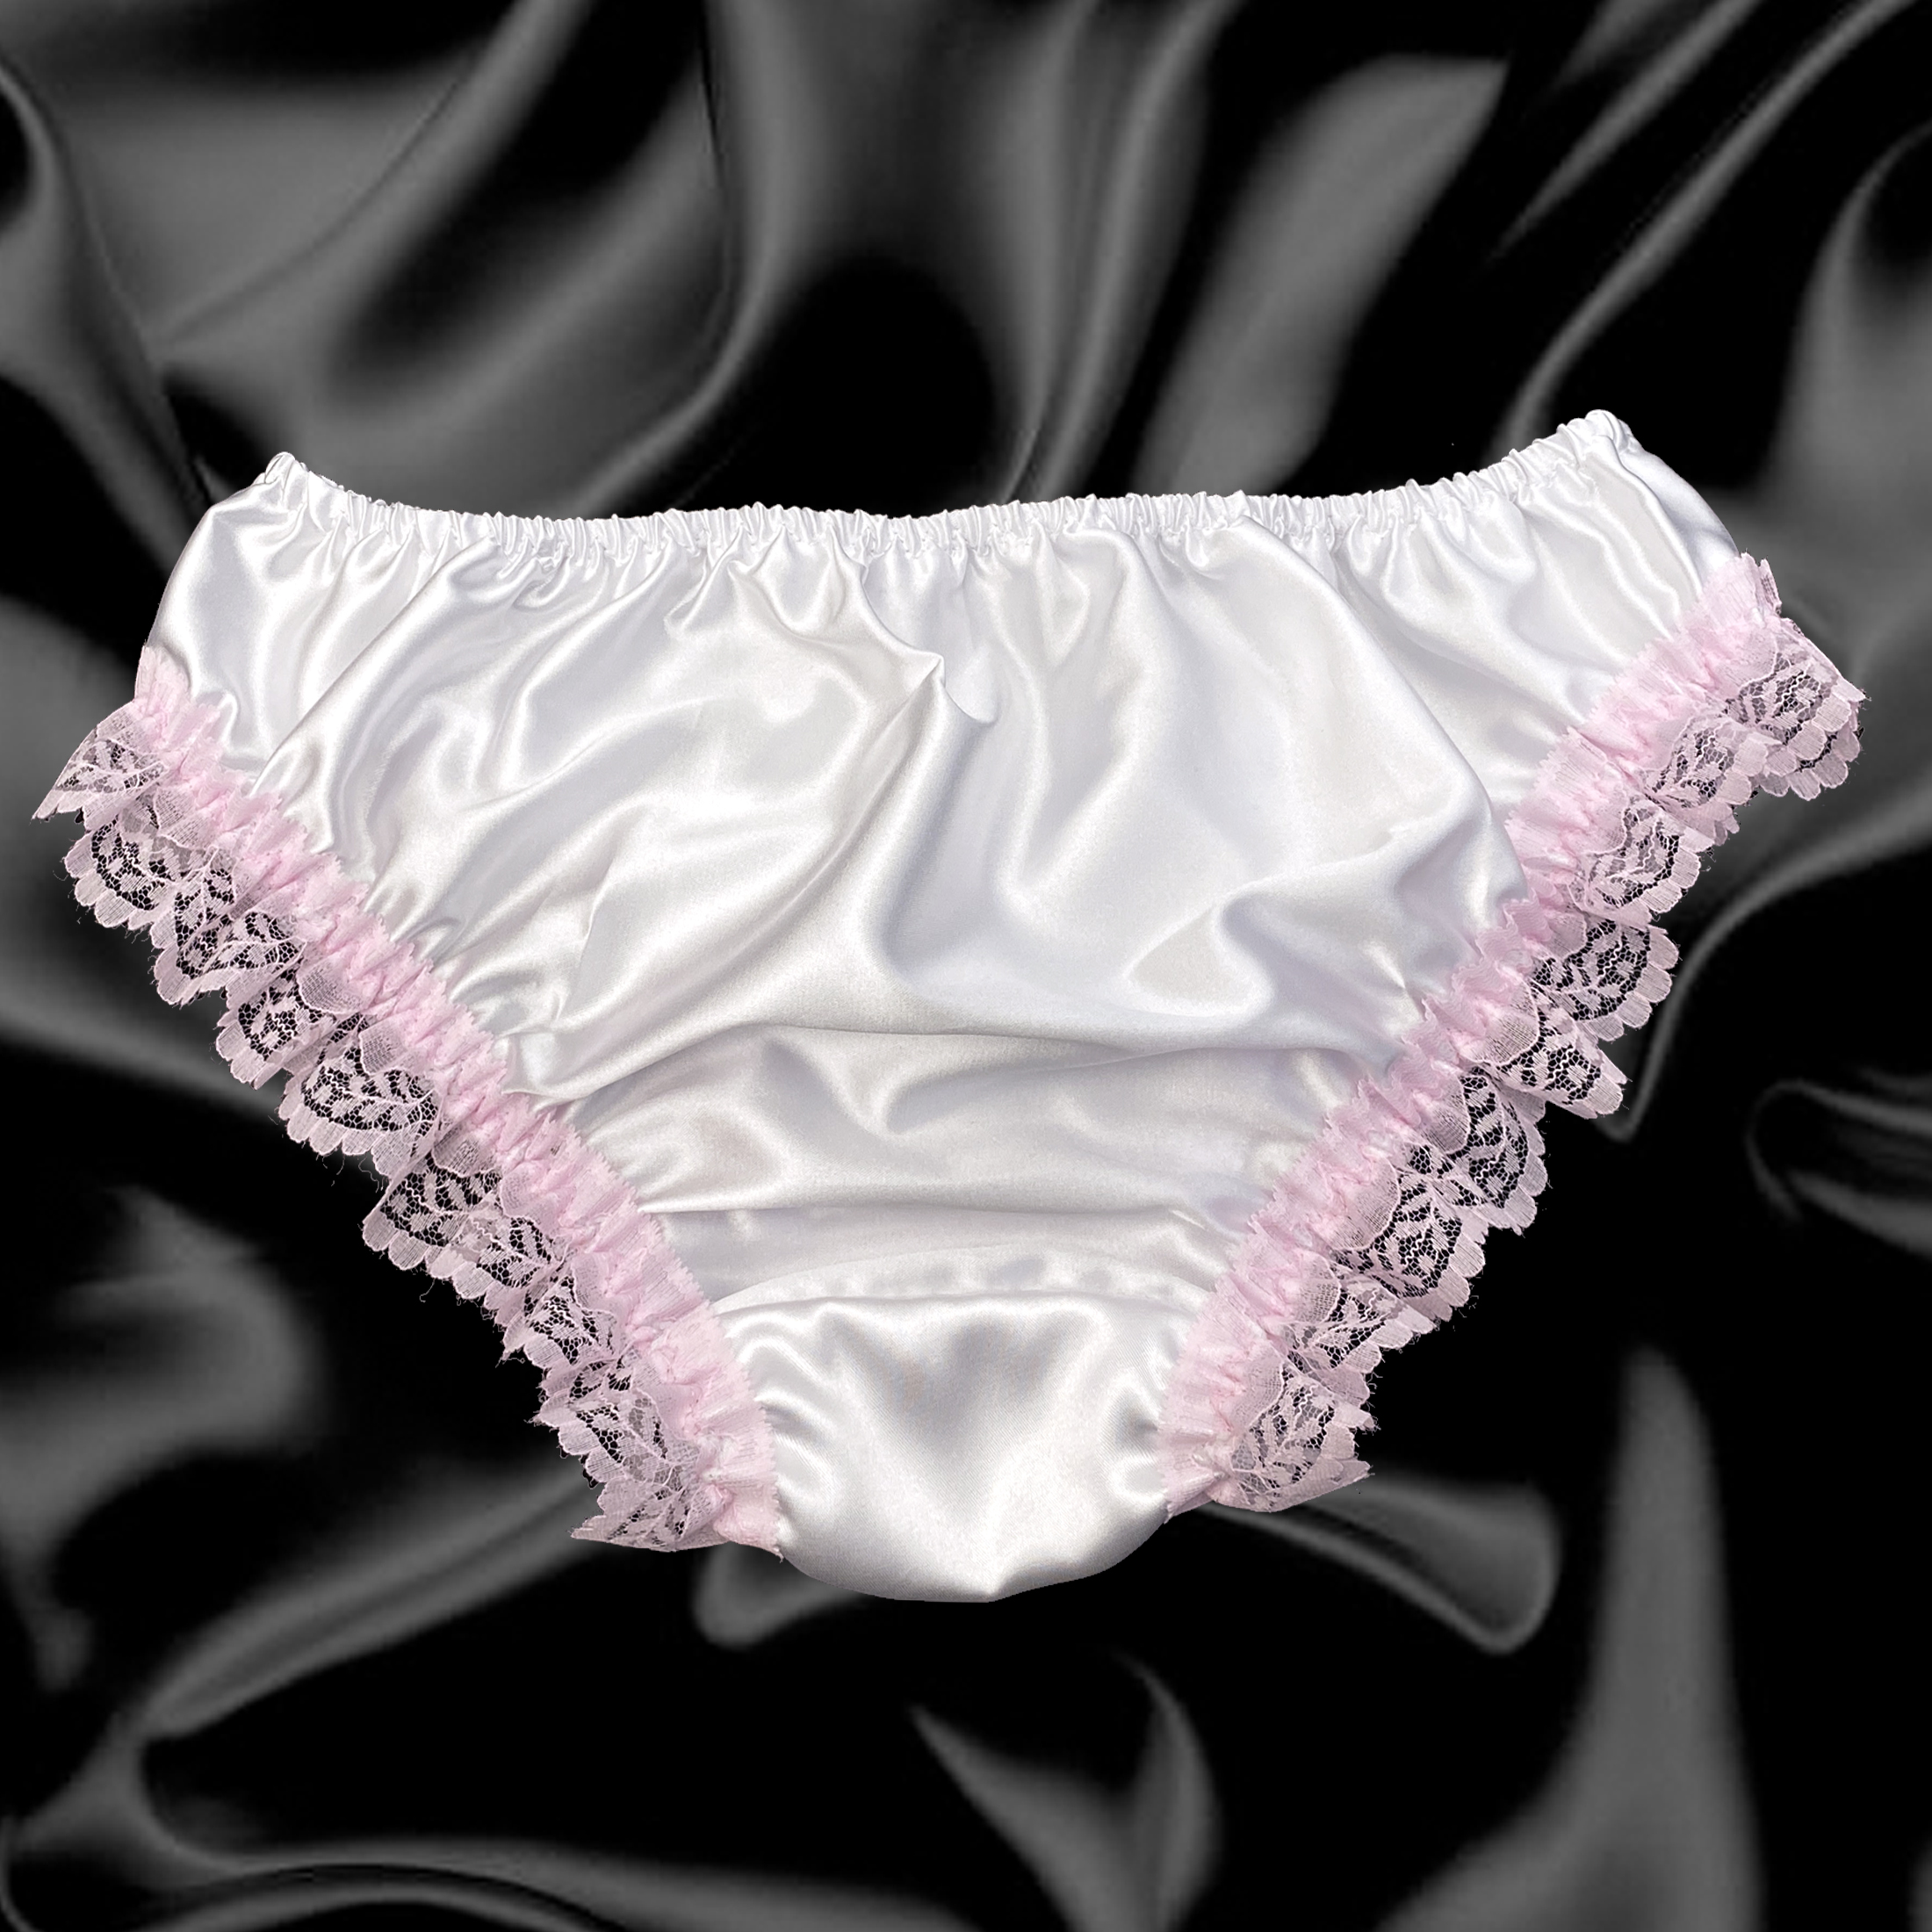 White Satin French Knickers, BB Lingerie